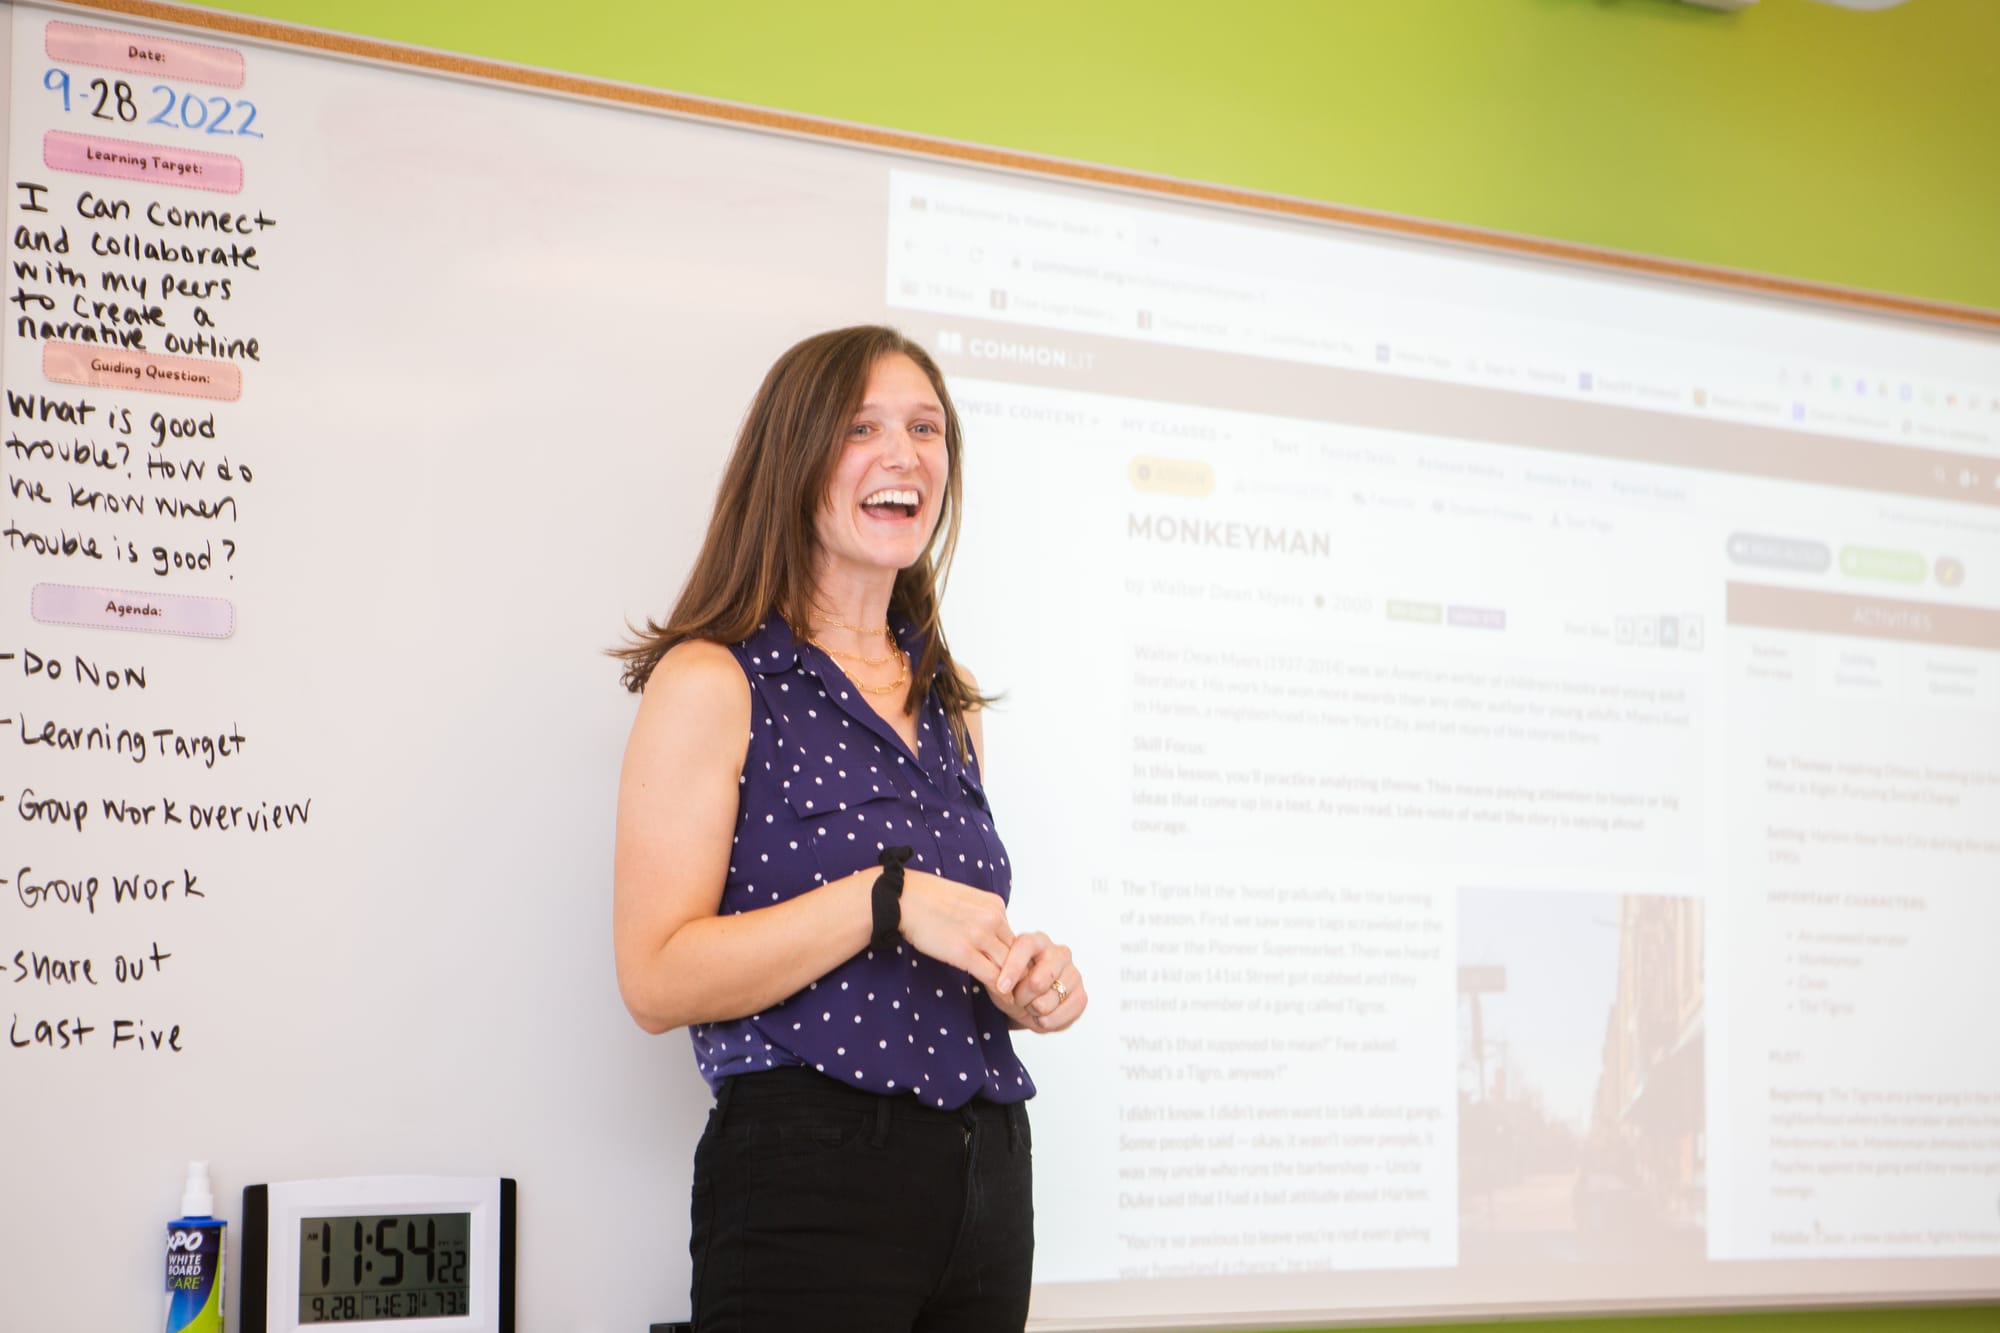 Smiling female learning facilitator standing in front of a whiteboard in a classroom